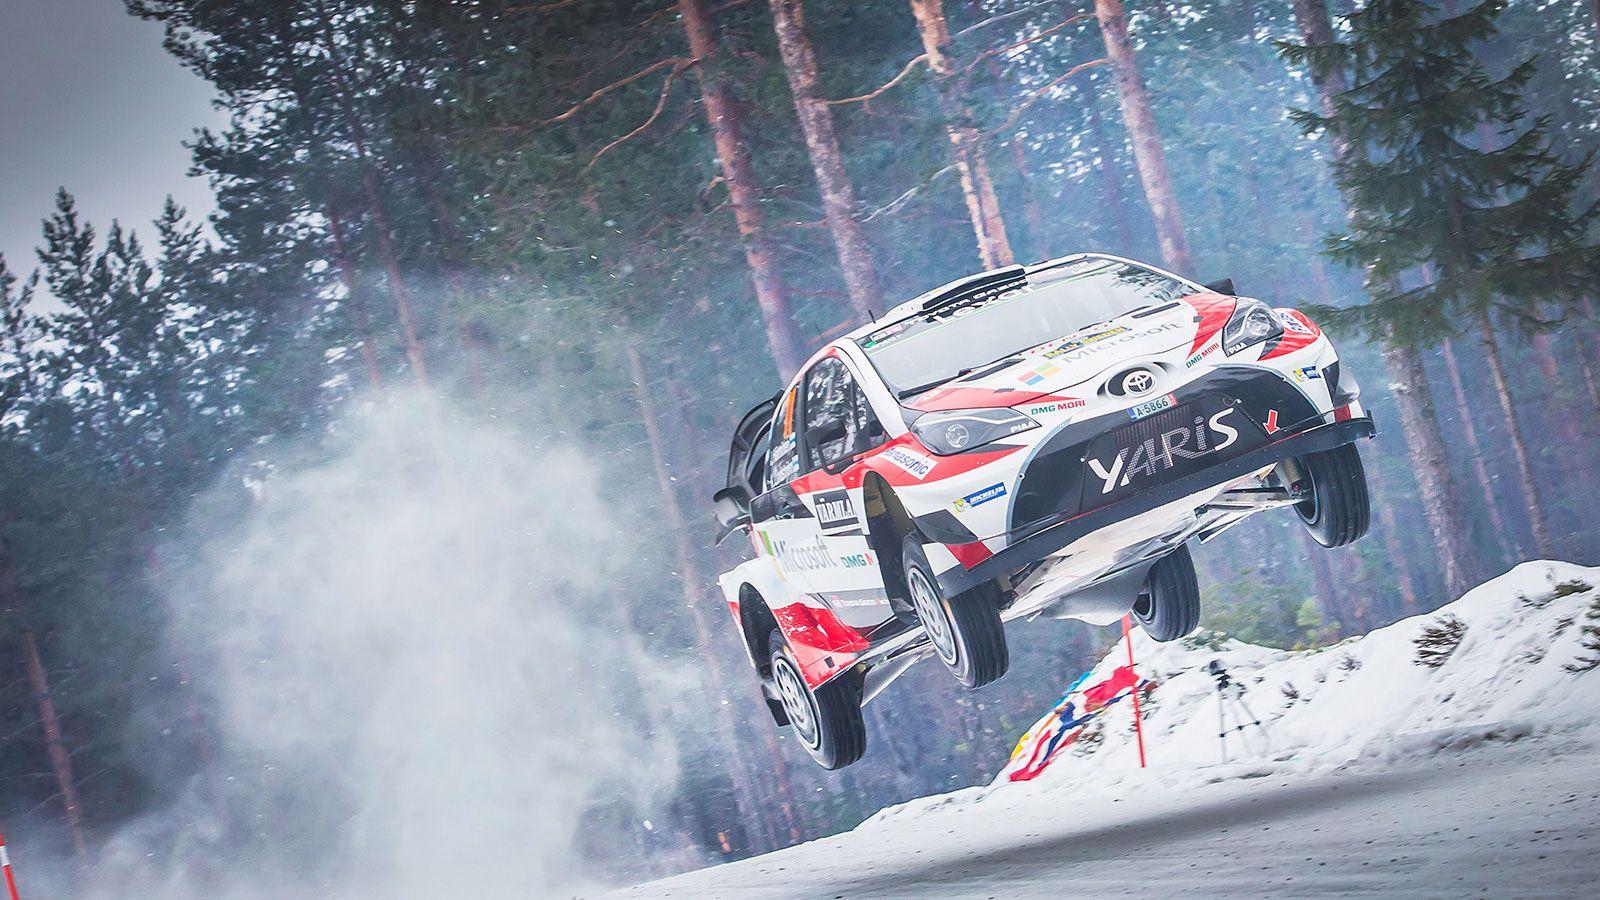 download free wrc 6 ps4